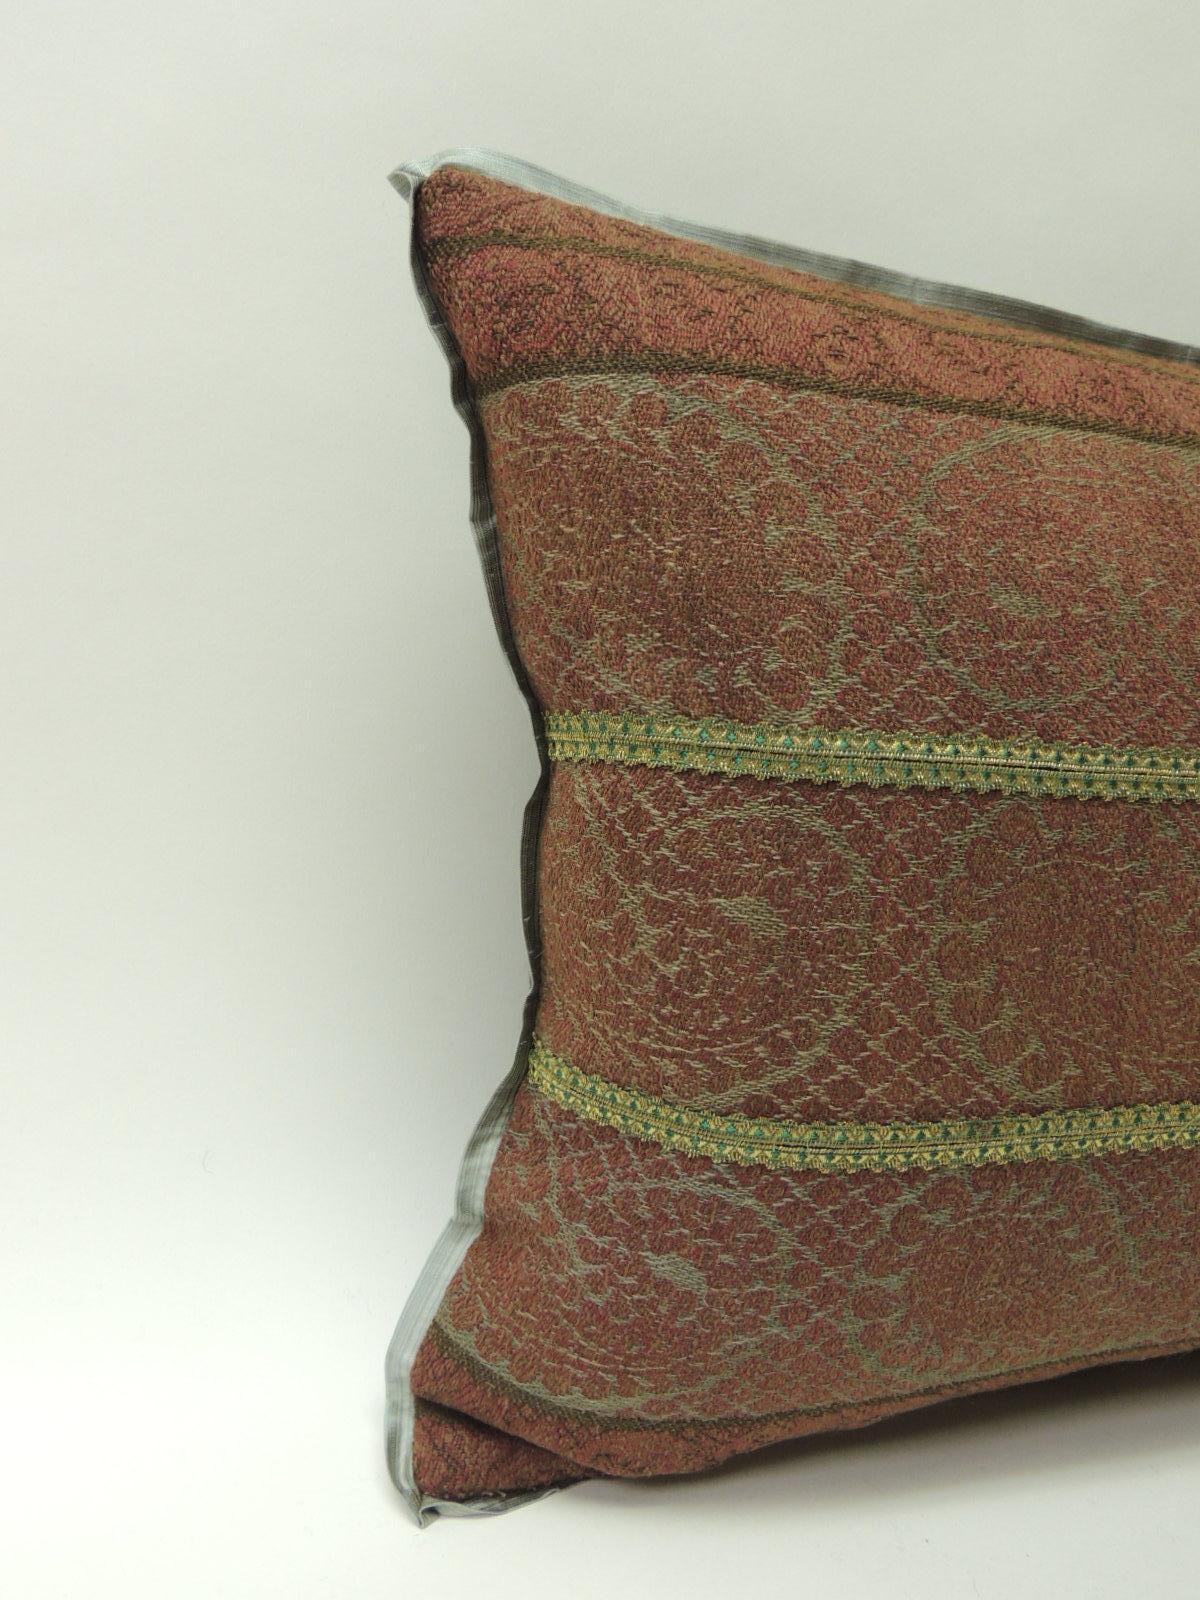 19th century antique woven red Kashmir Paisley Bolster decorative pillow.
19th century antique woven red and green Kashmir stripes decorative long bolster pillow with custom flat silk trim and hunter green cloth fabric backing. Embellish with gold